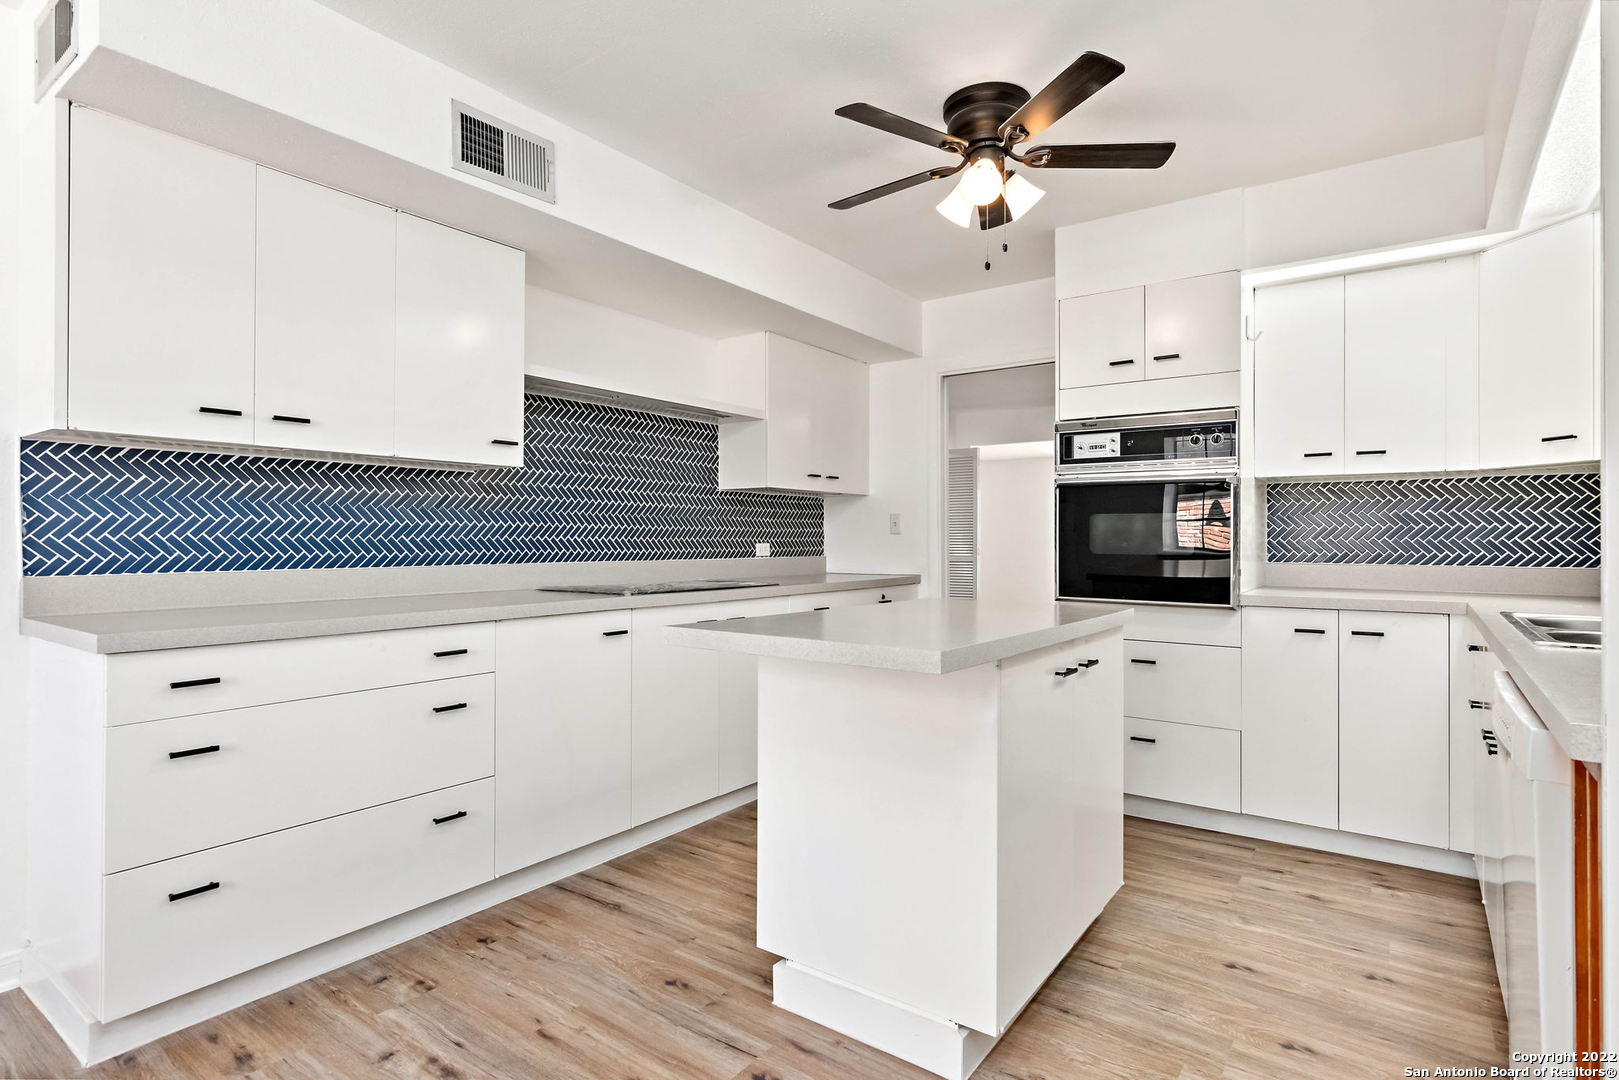 a kitchen with stainless steel appliances sink cabinets and stove top oven